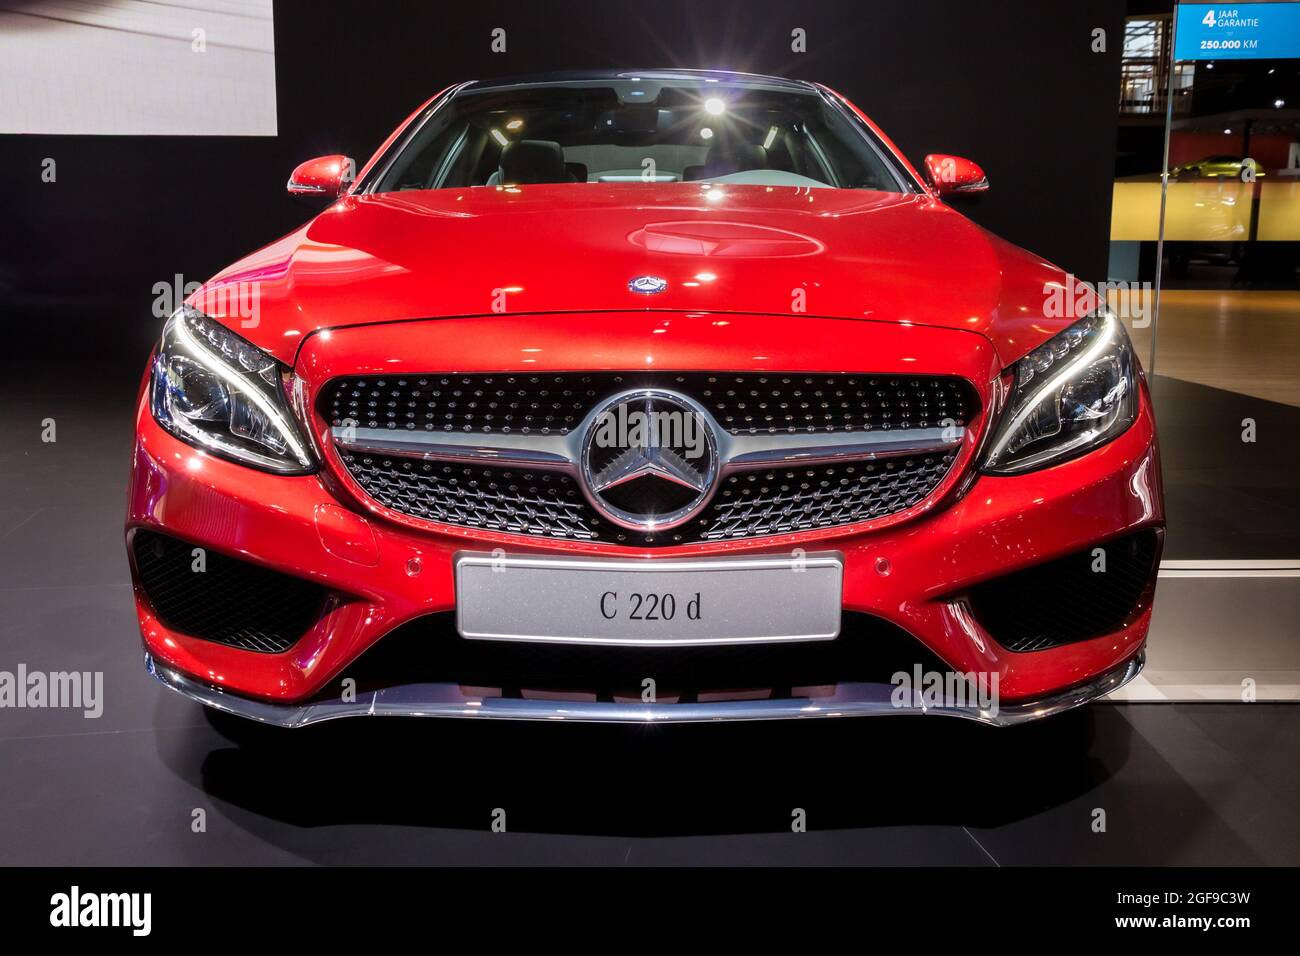 Mercedes Benz C 220 D car showcased at the Brussels Expo Autosalon motor show. Belgium - January 12, 2016 Stock Photo